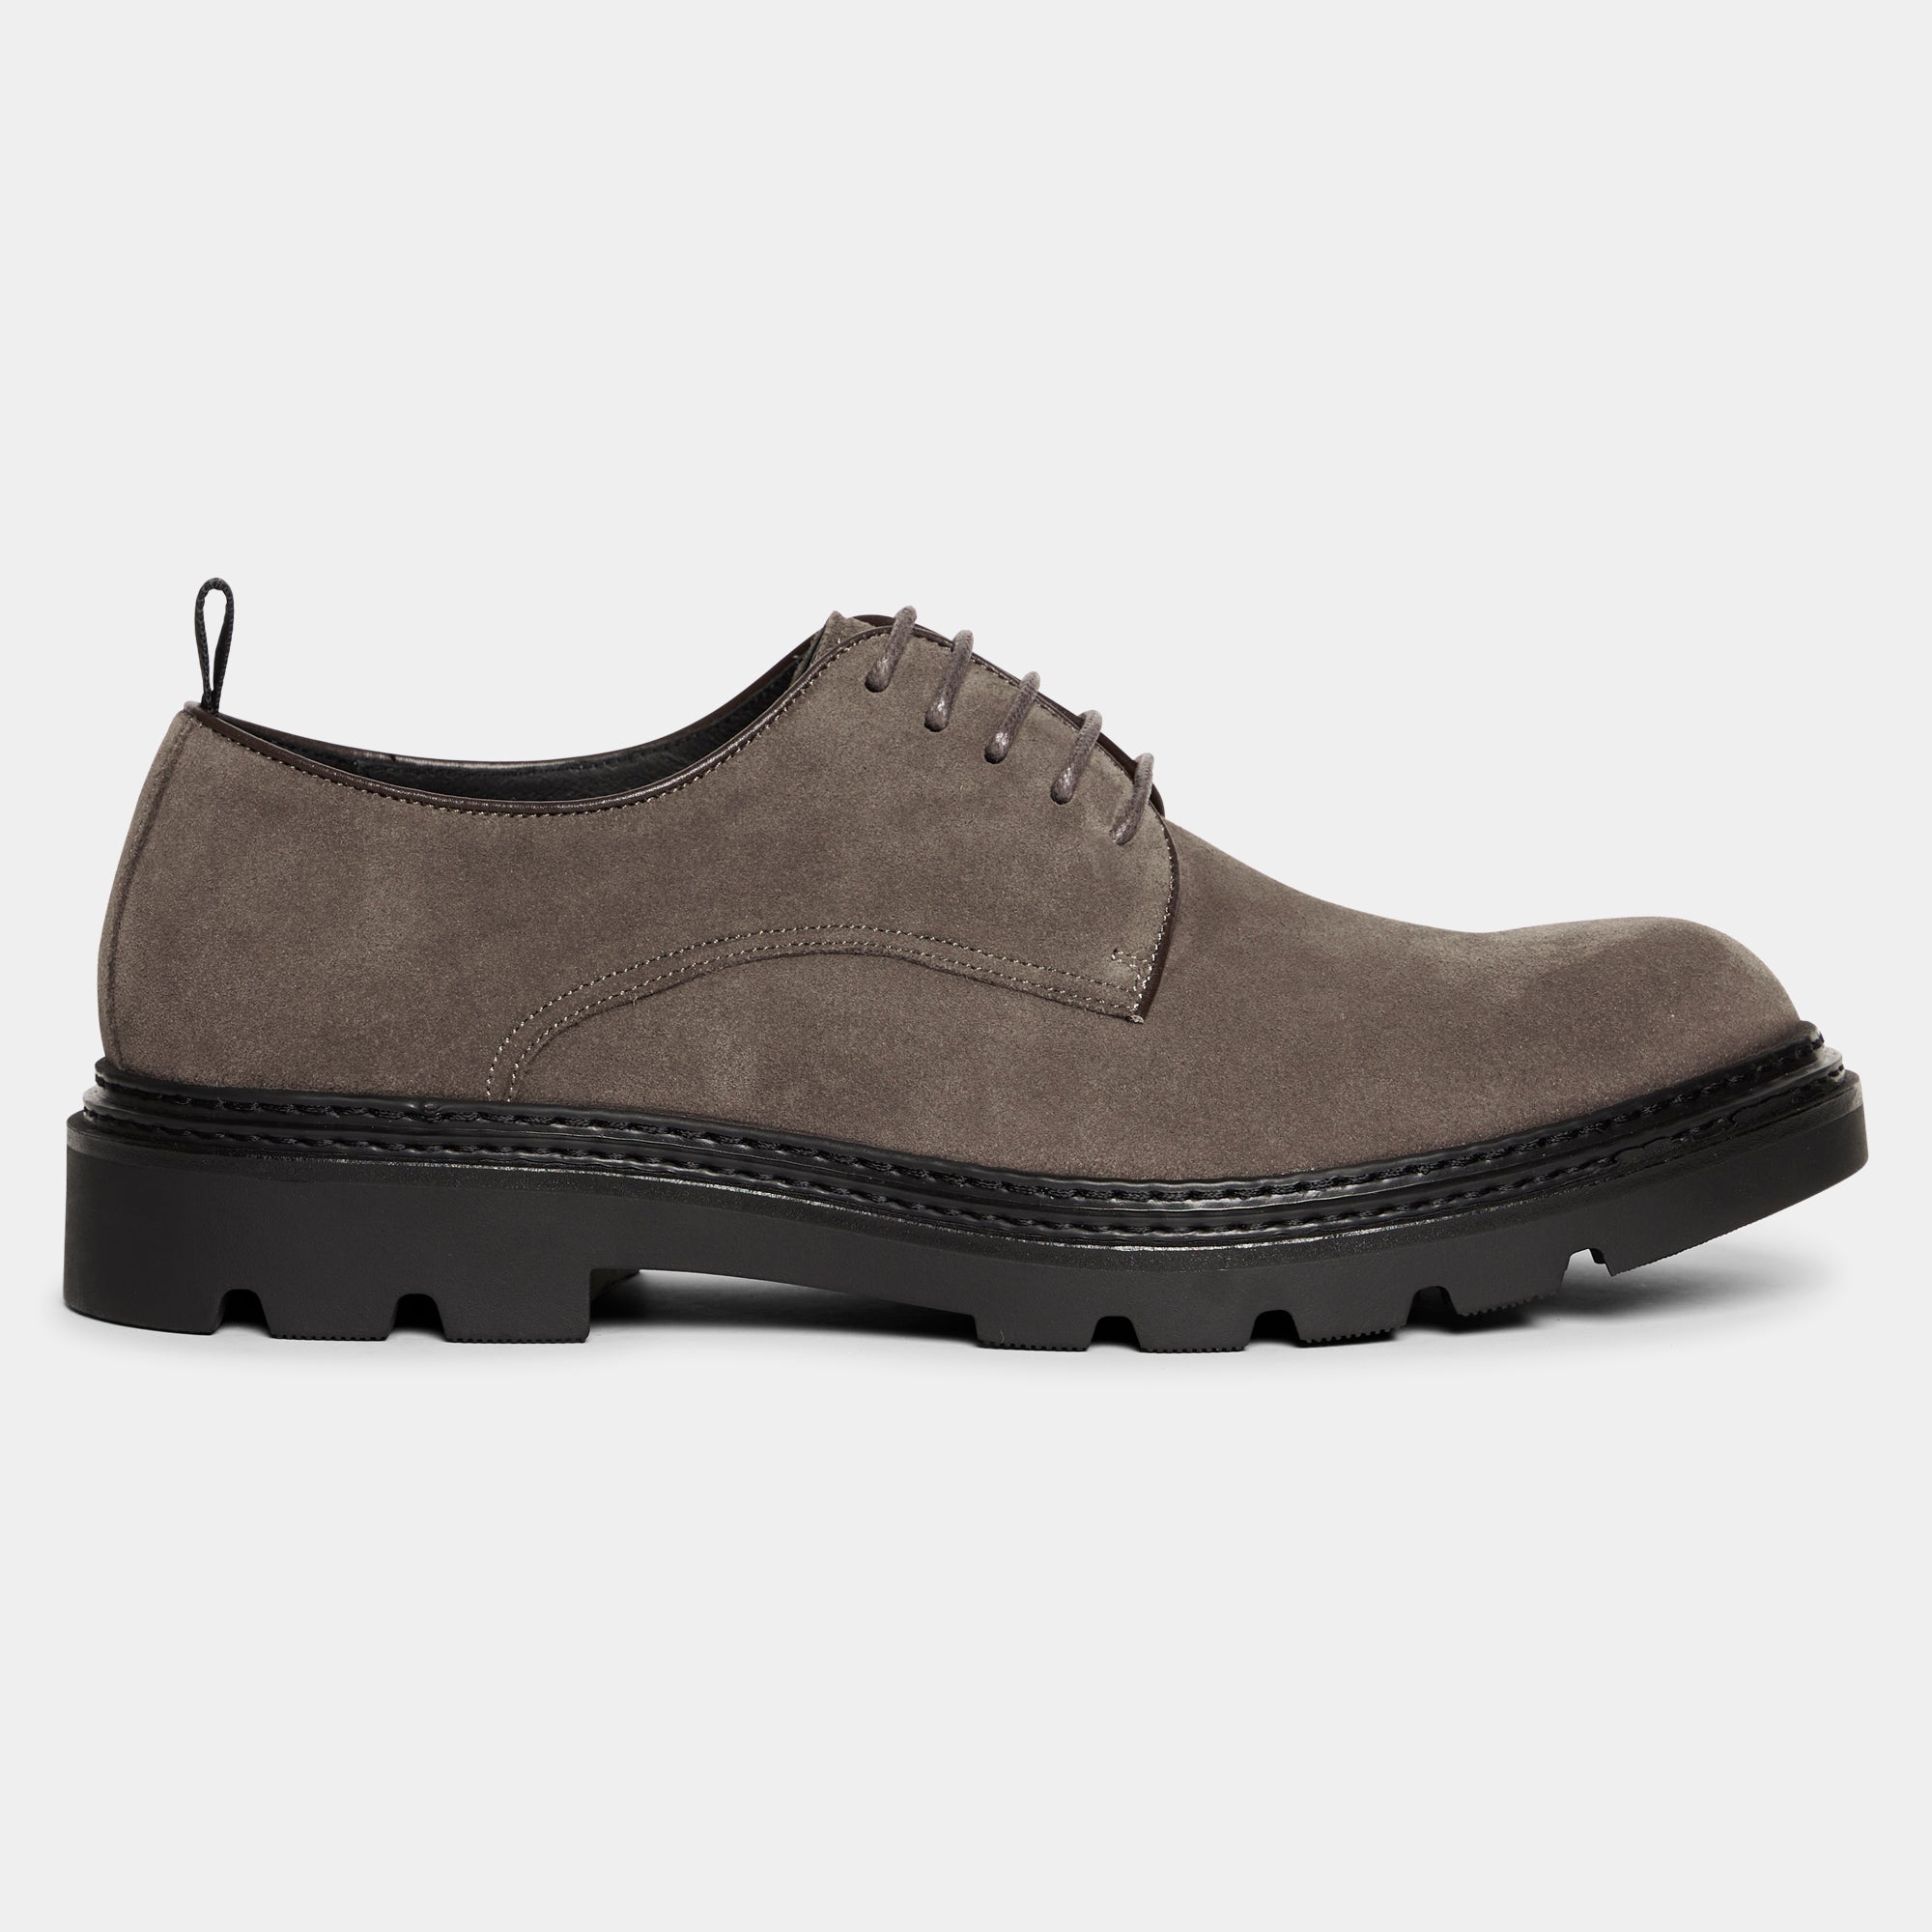 TGA by Ahler 4010 Derby shoe Taupe